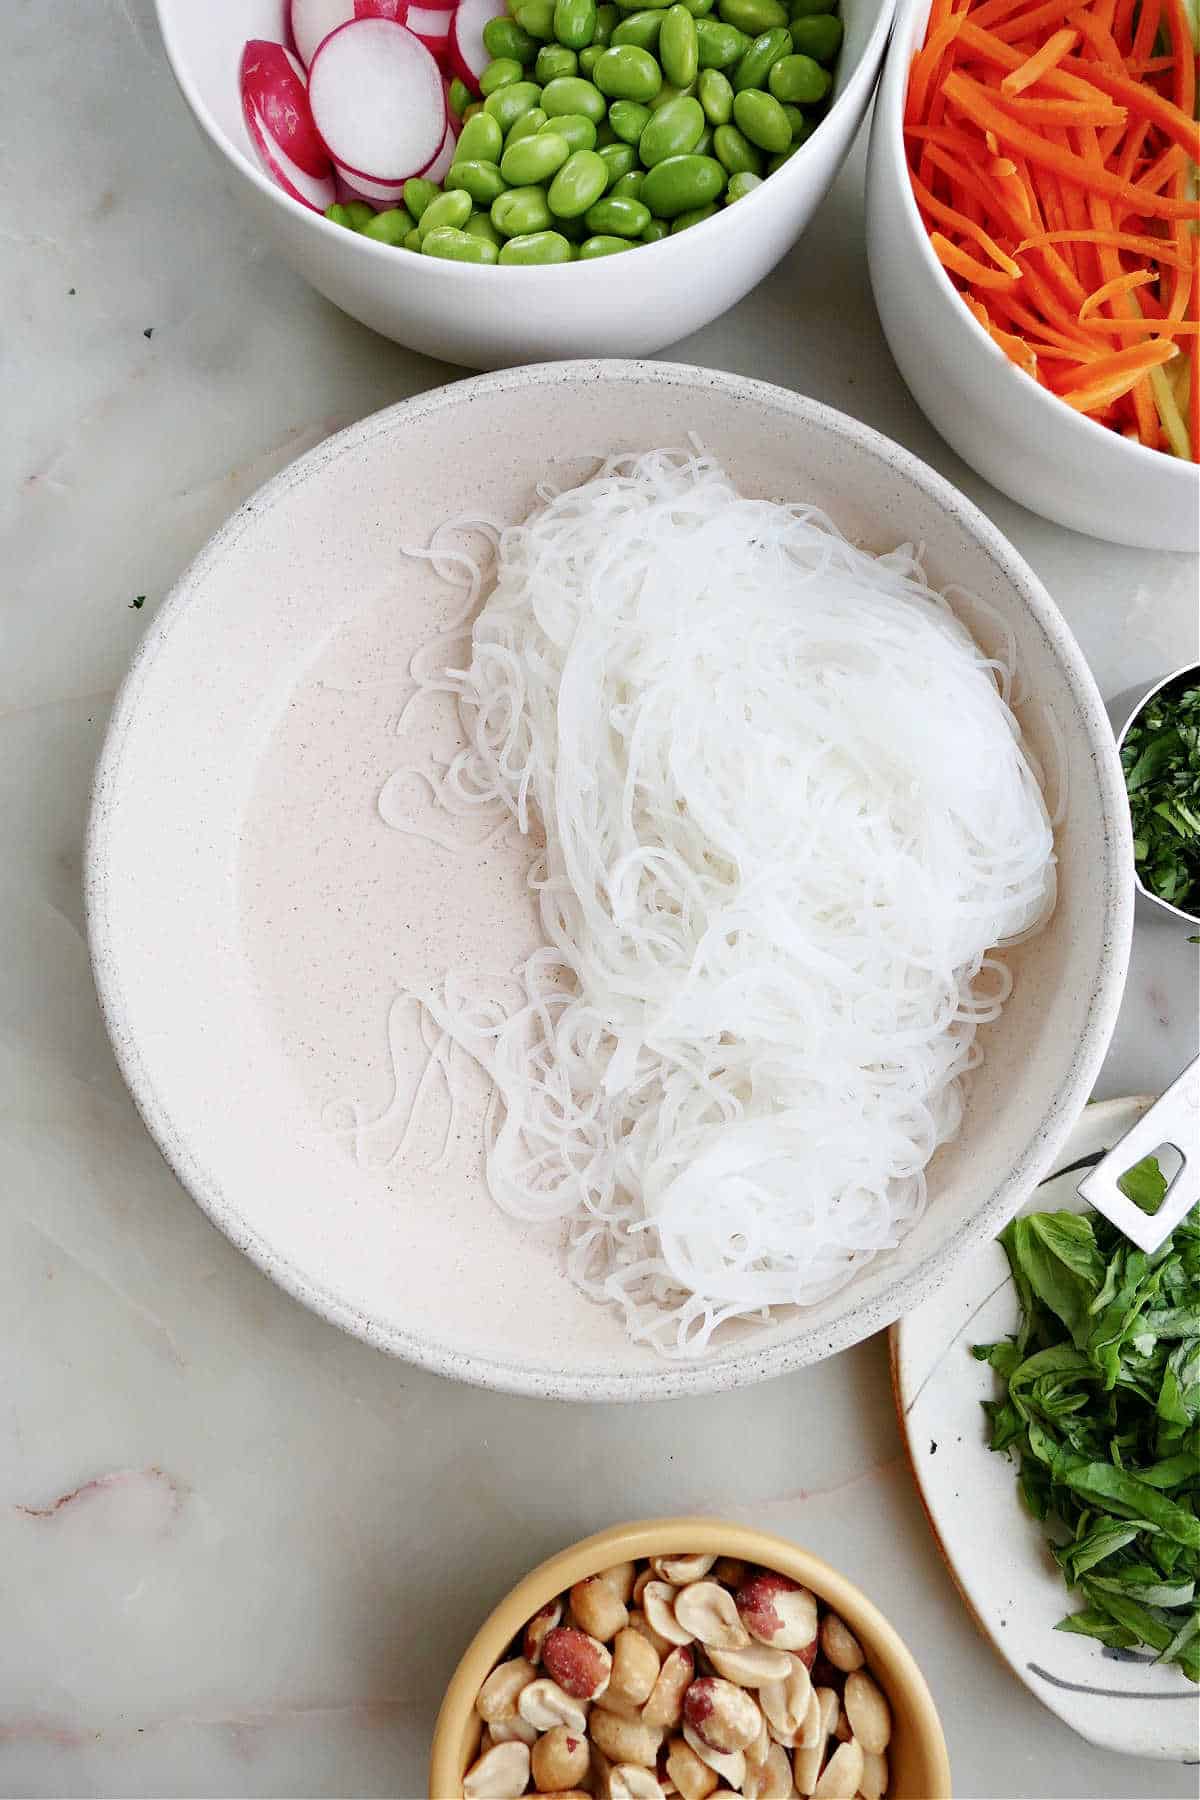 thin rice noodles placed in half of a serving bowl